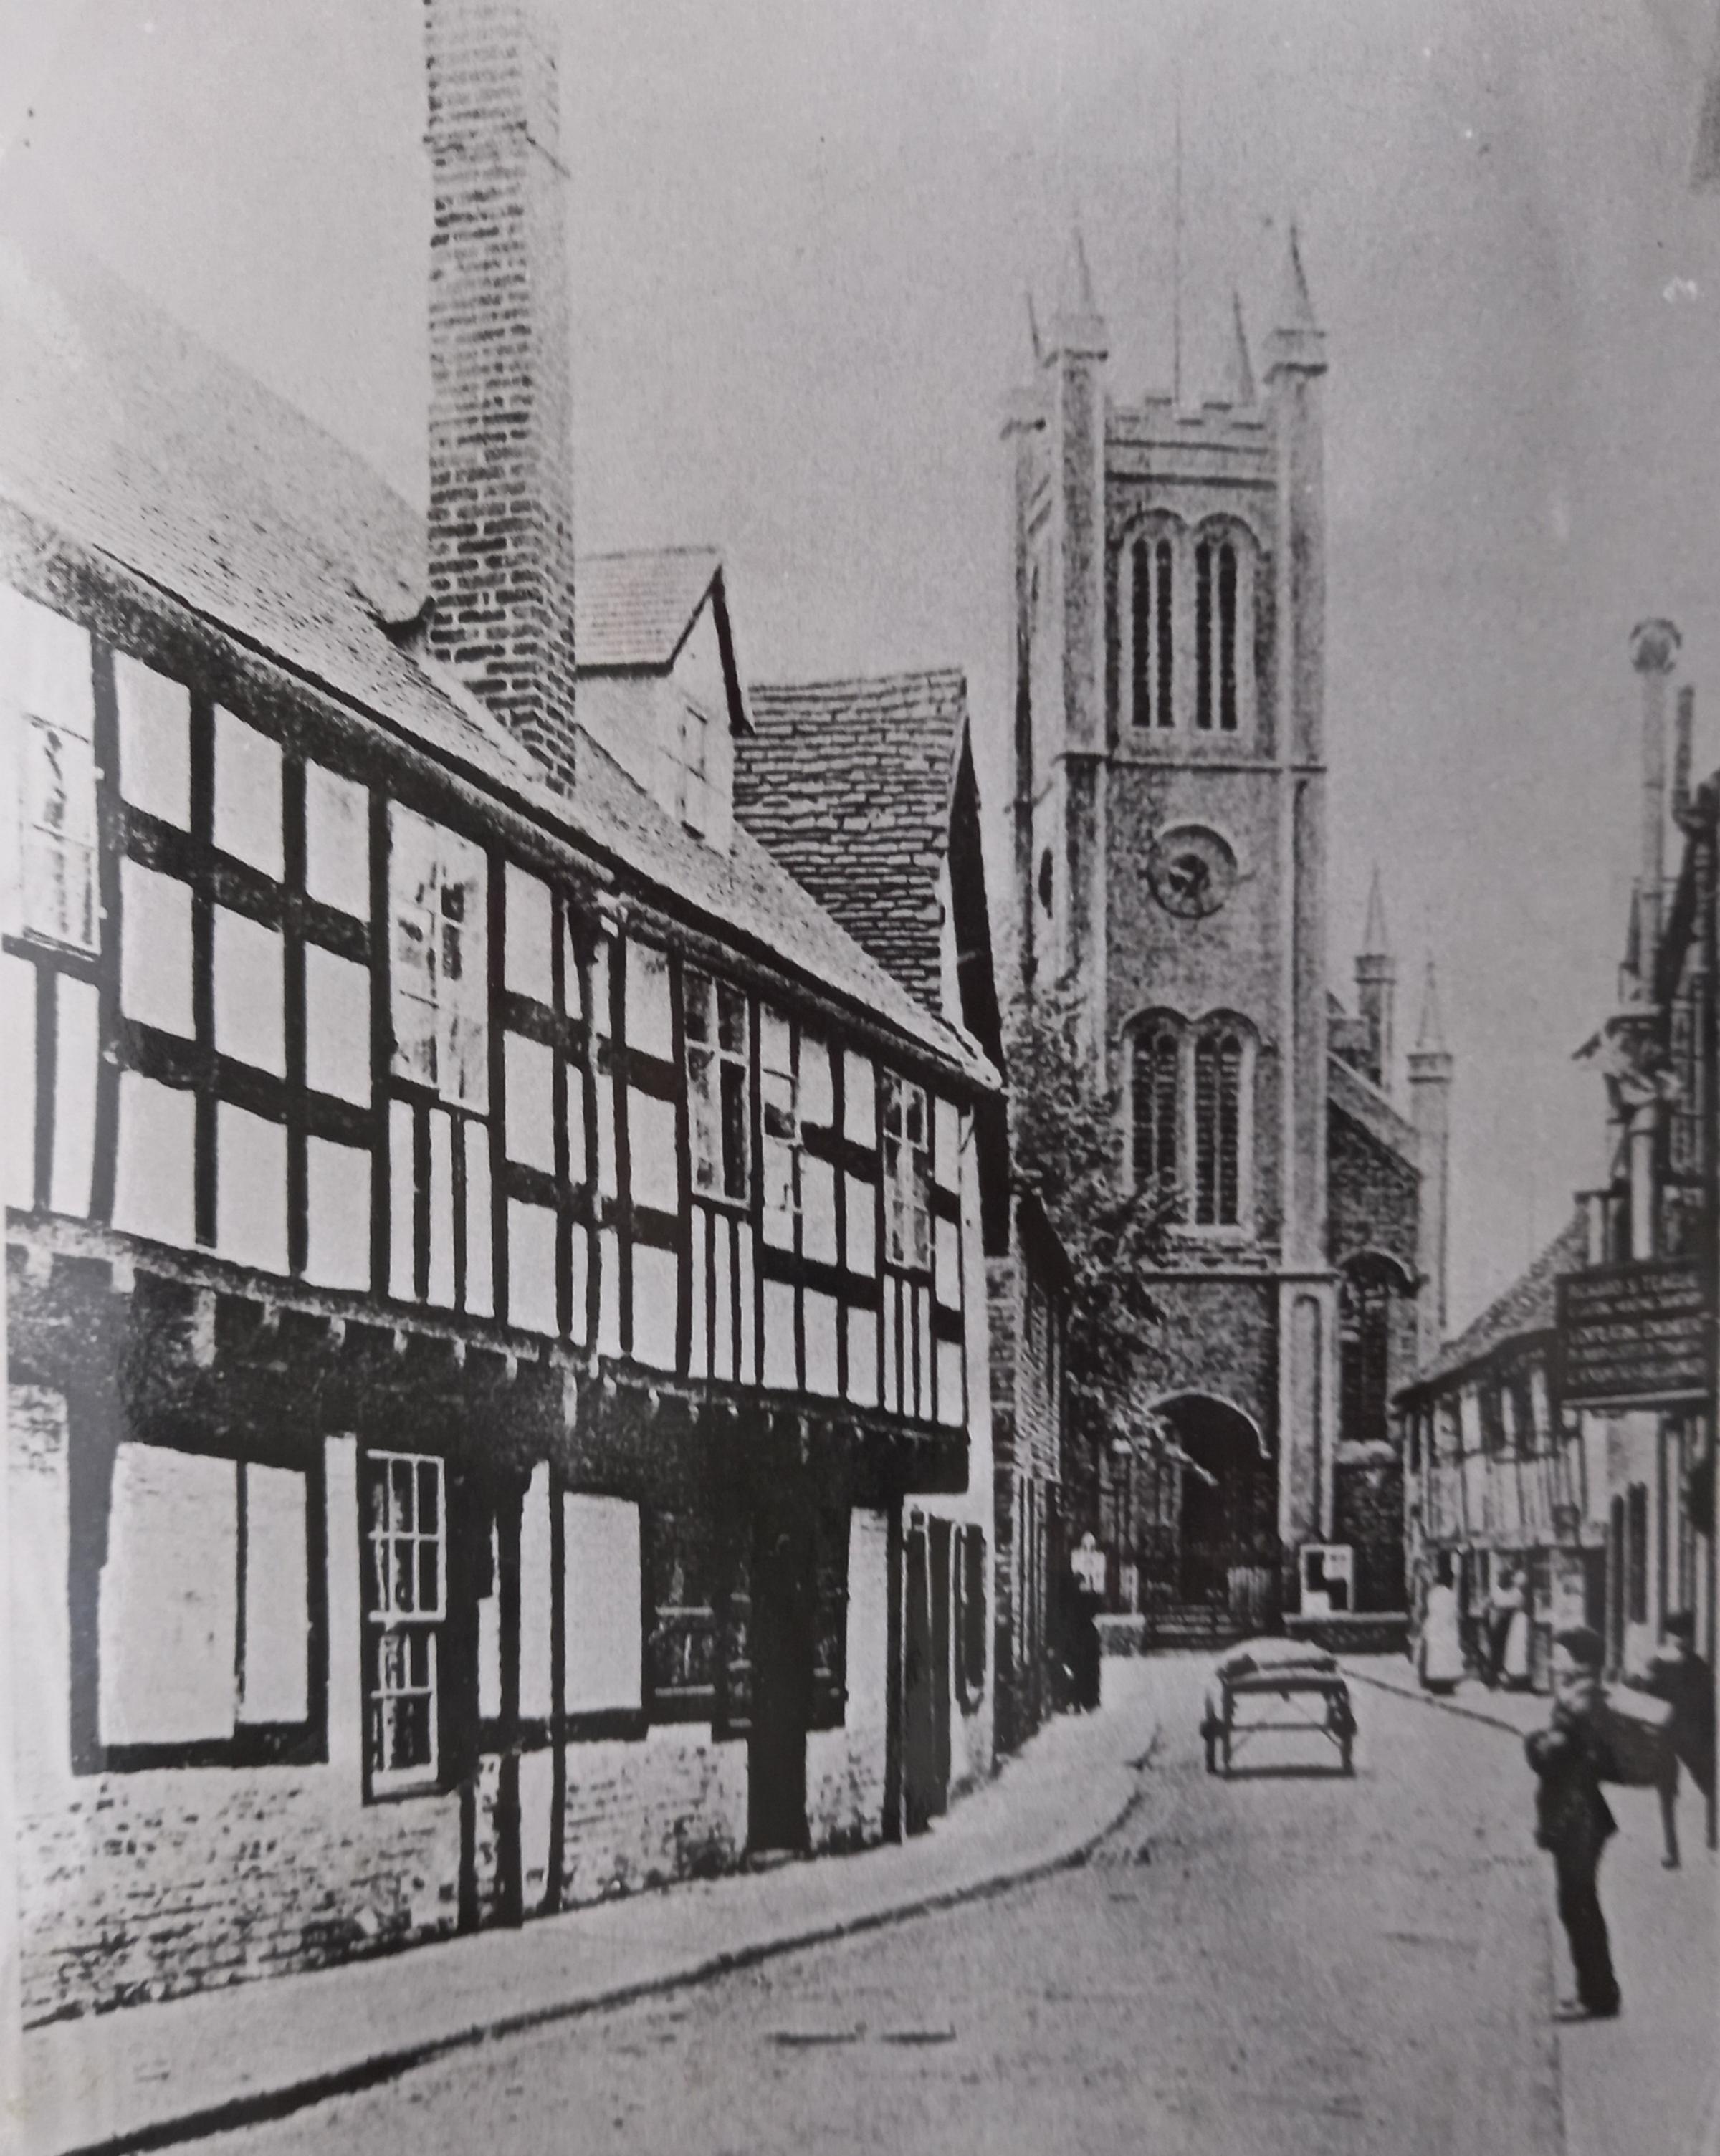 St Peter’s Street, Worcester, with its church at the end. Full of character, but long gone